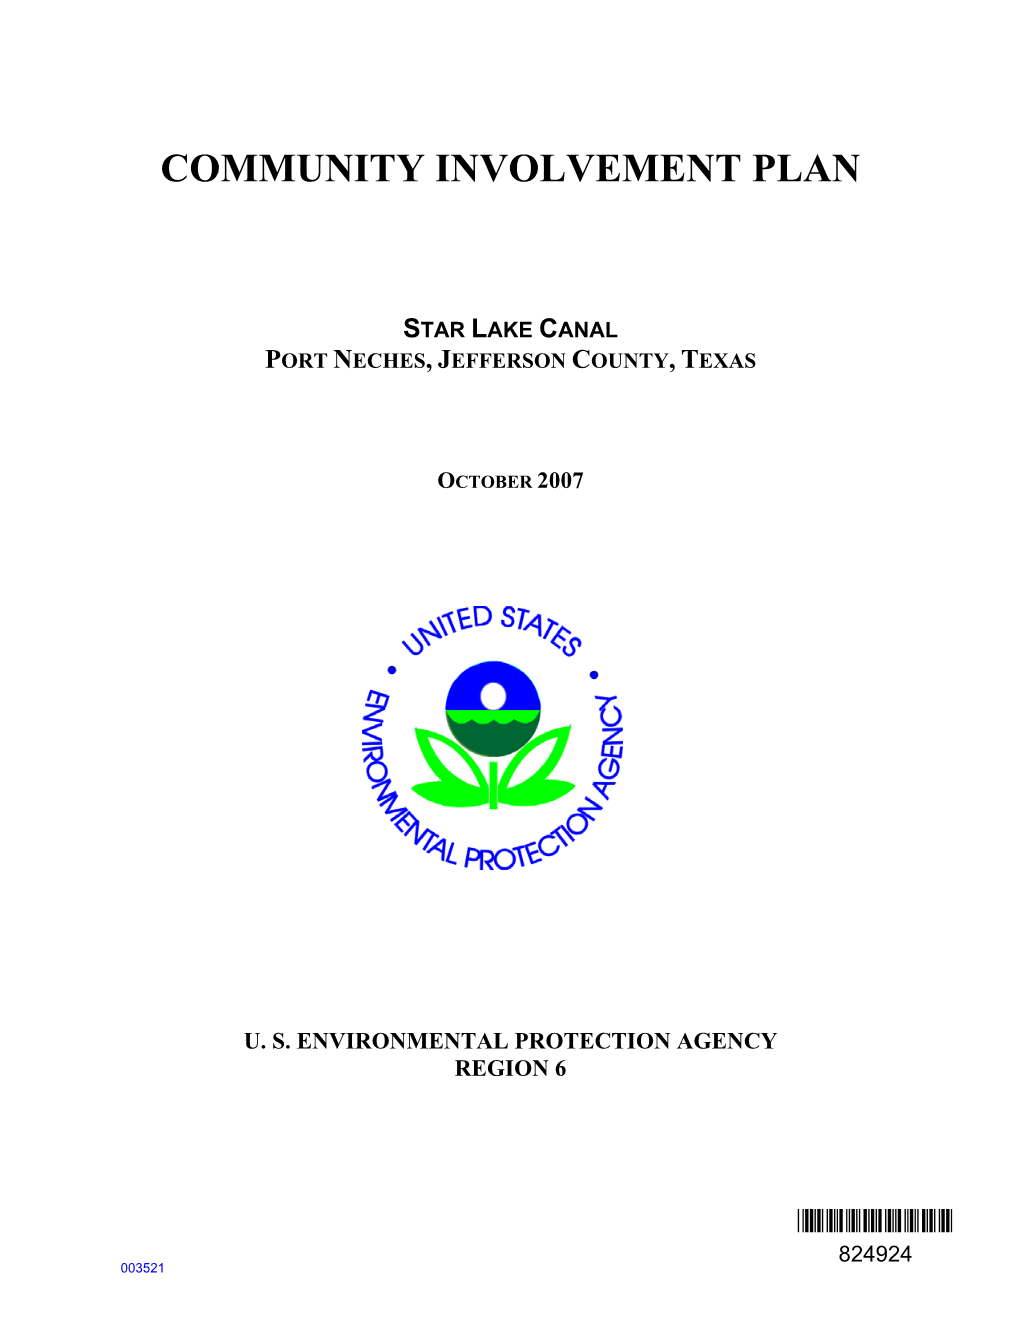 Community Involvement Plan for Star Lake Canal